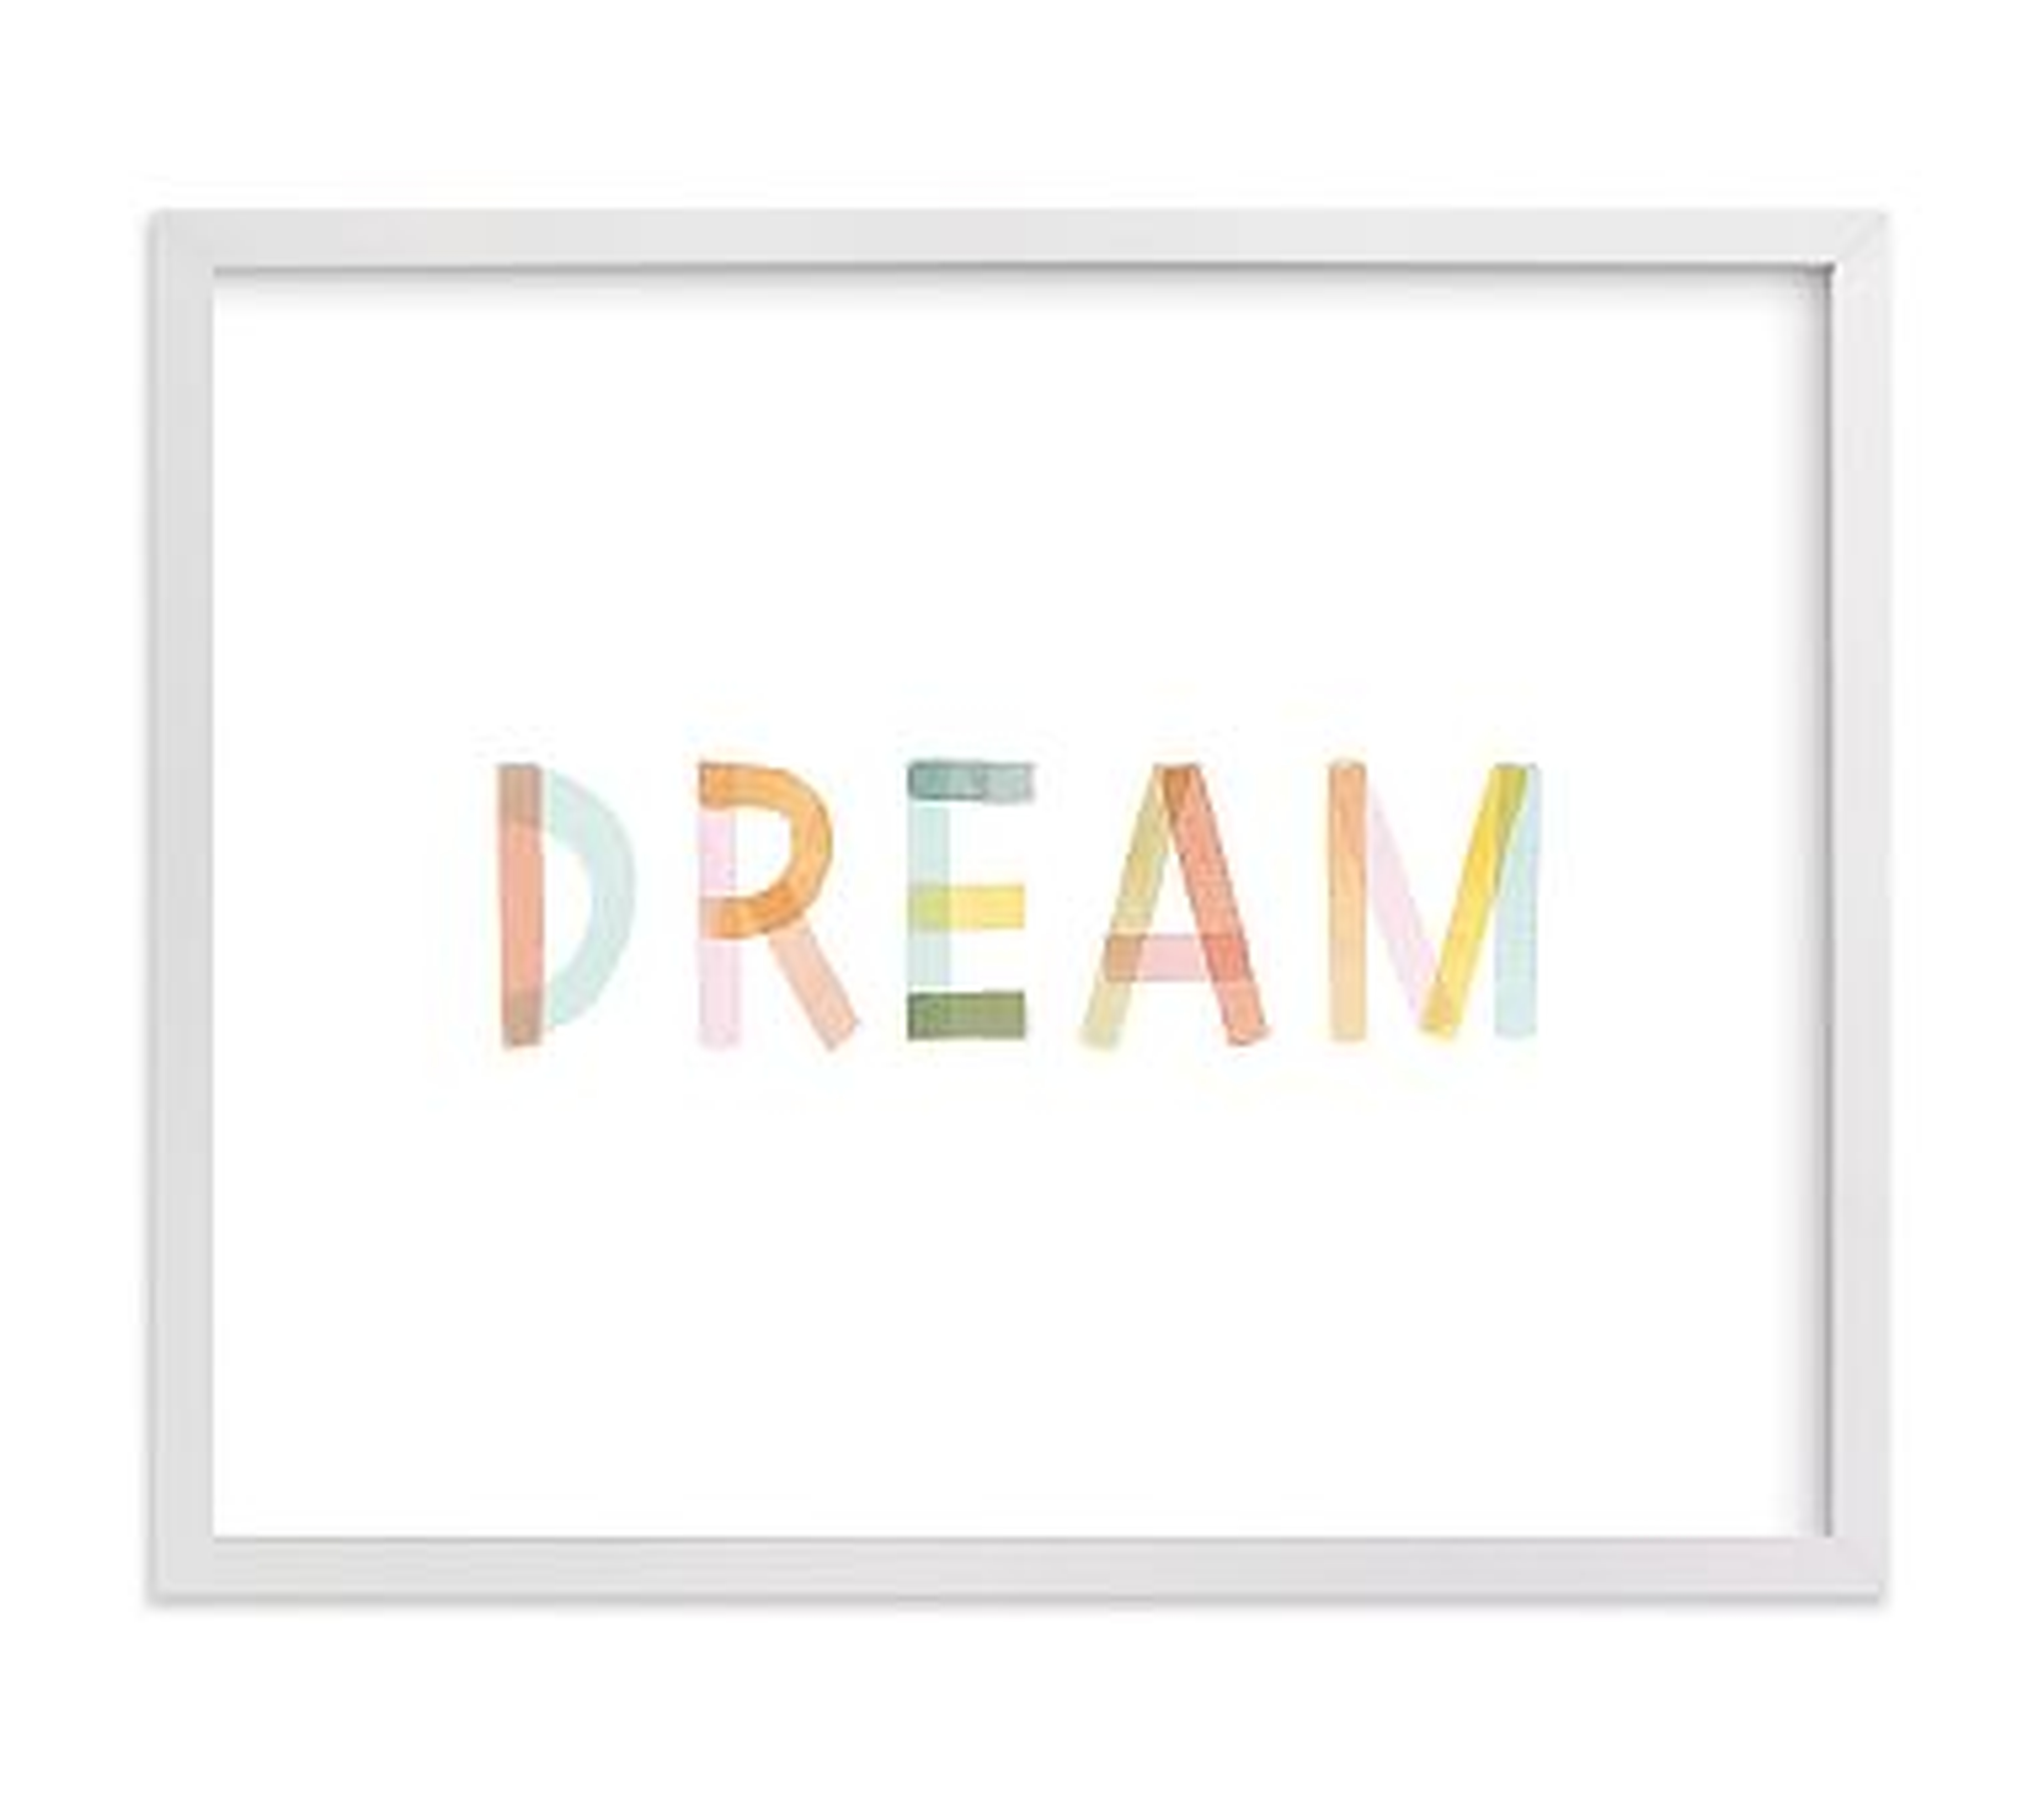 Dreaming in Color Wall Art by Minted(R), 14x11, White - Pottery Barn Kids